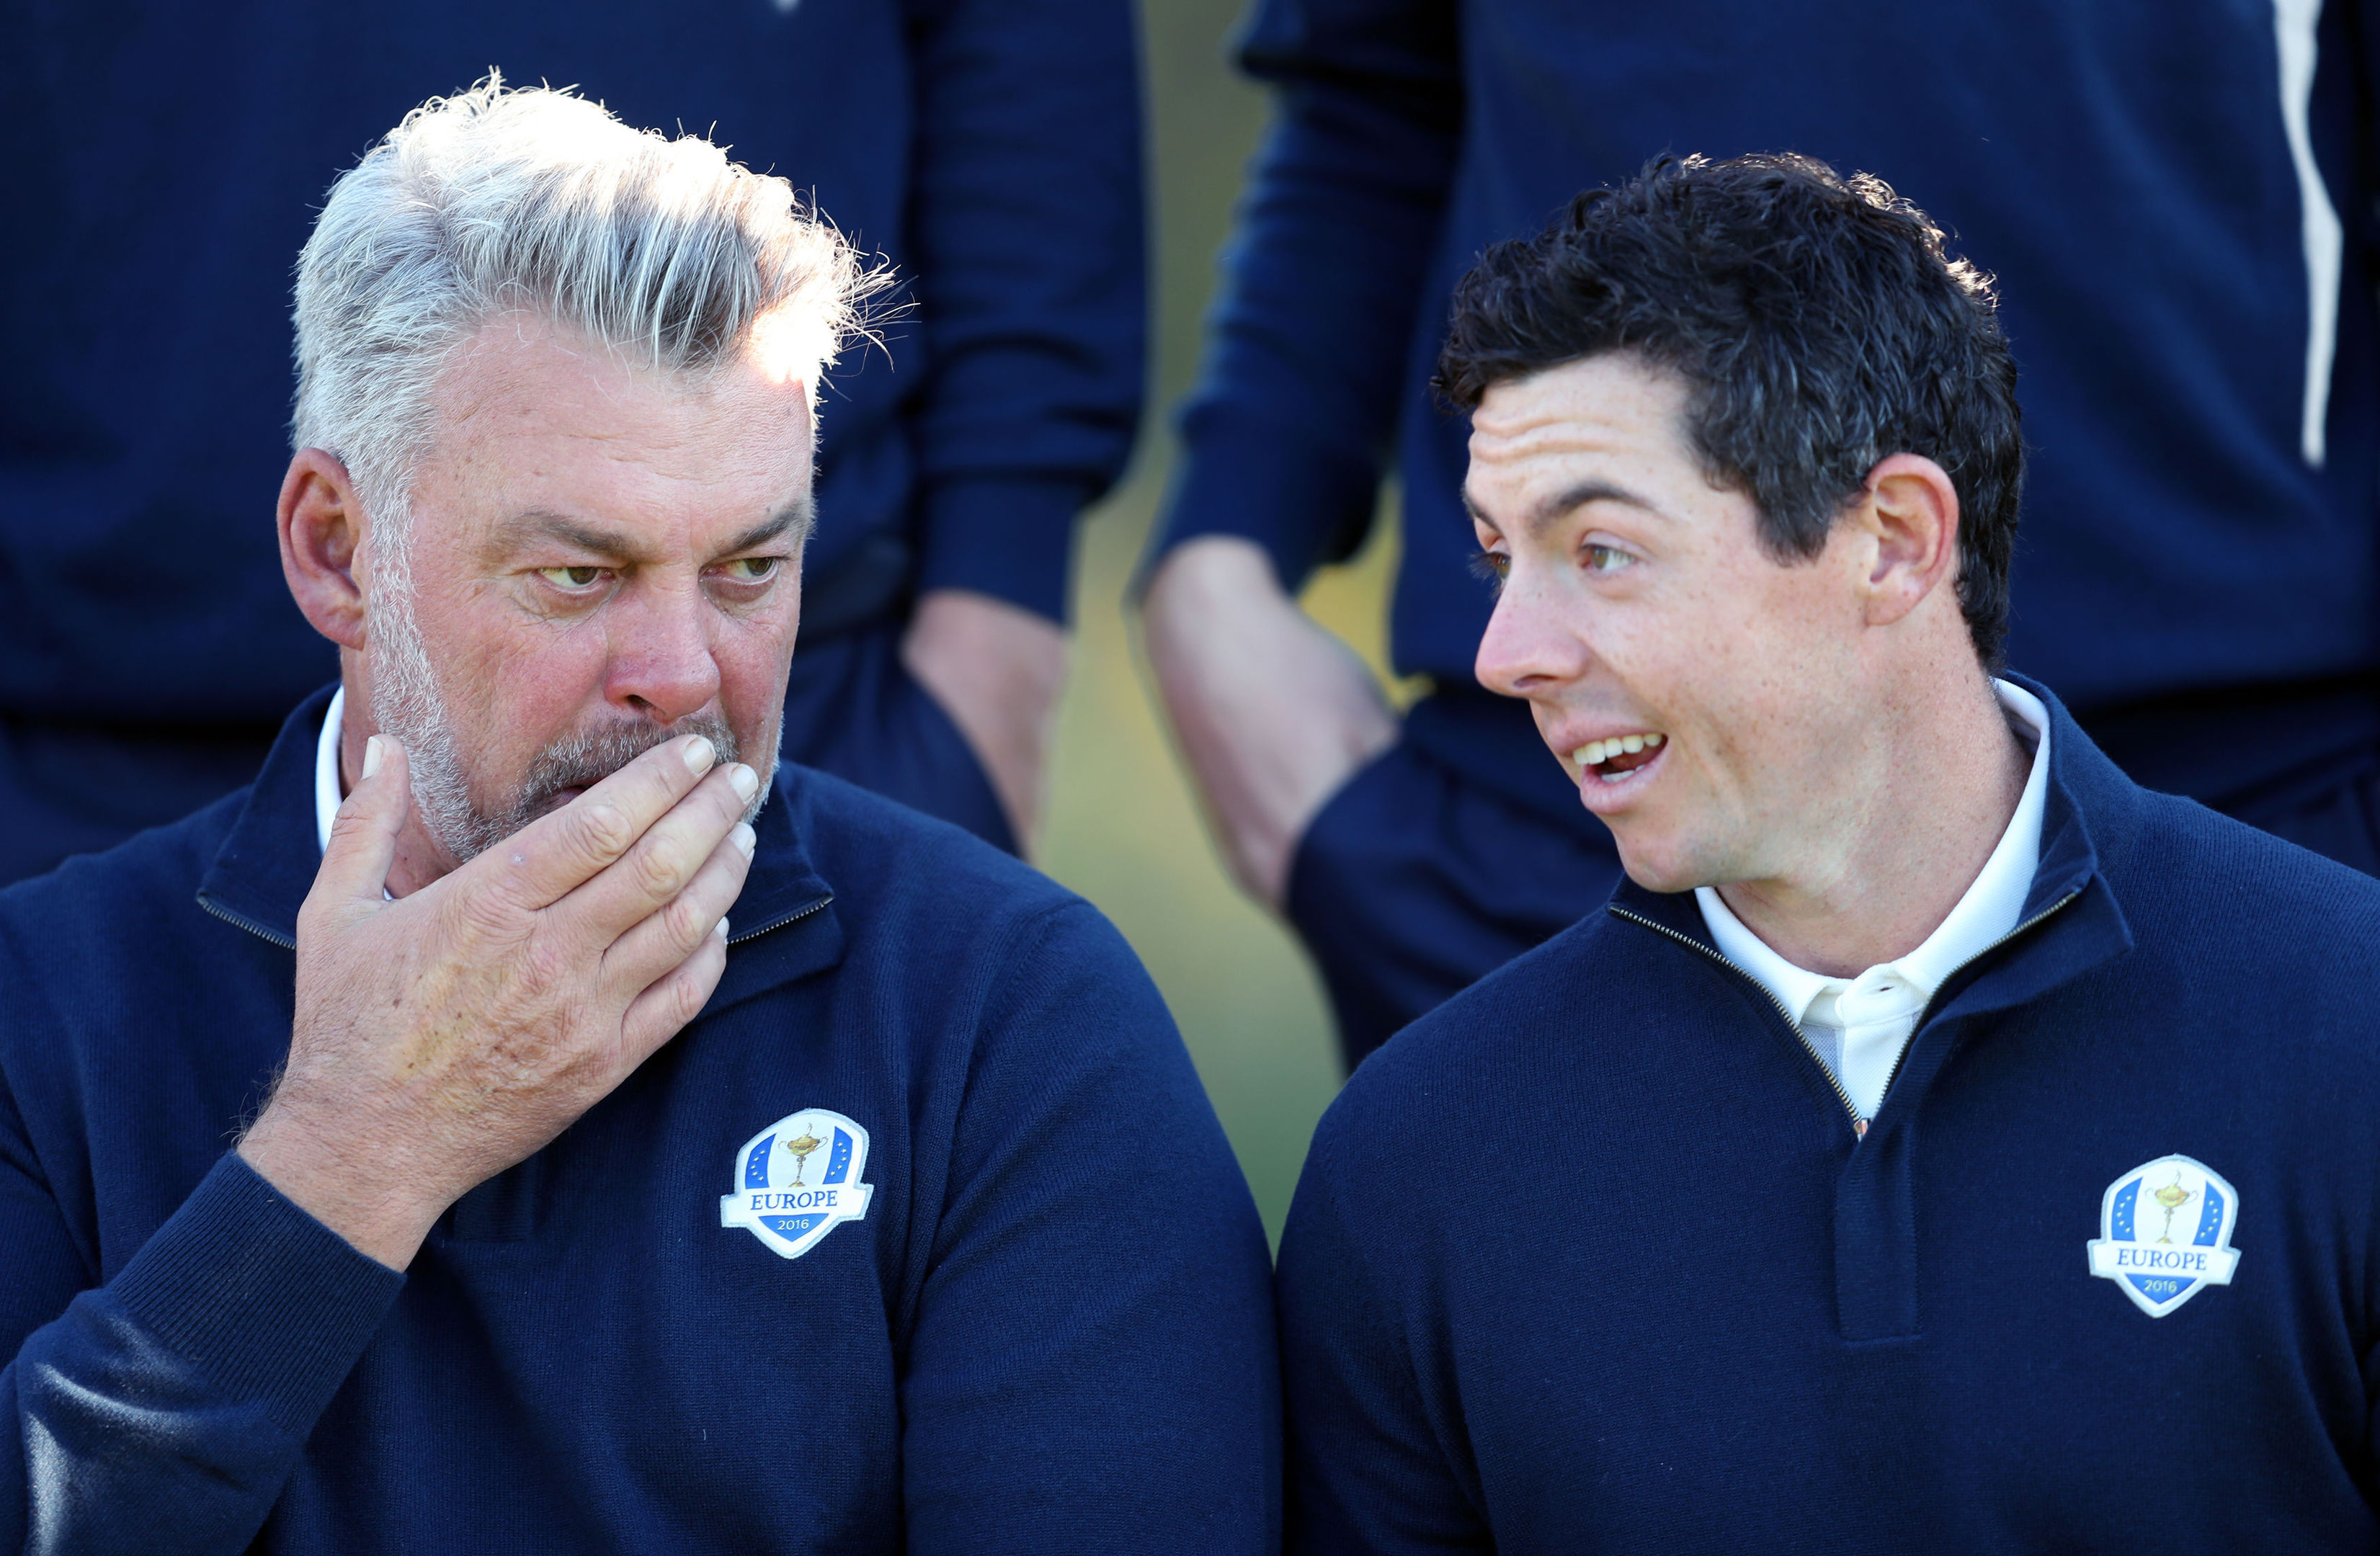 Ryder Cup captain Darren Clarke and Rory McIlroy's friendship go back a long way.